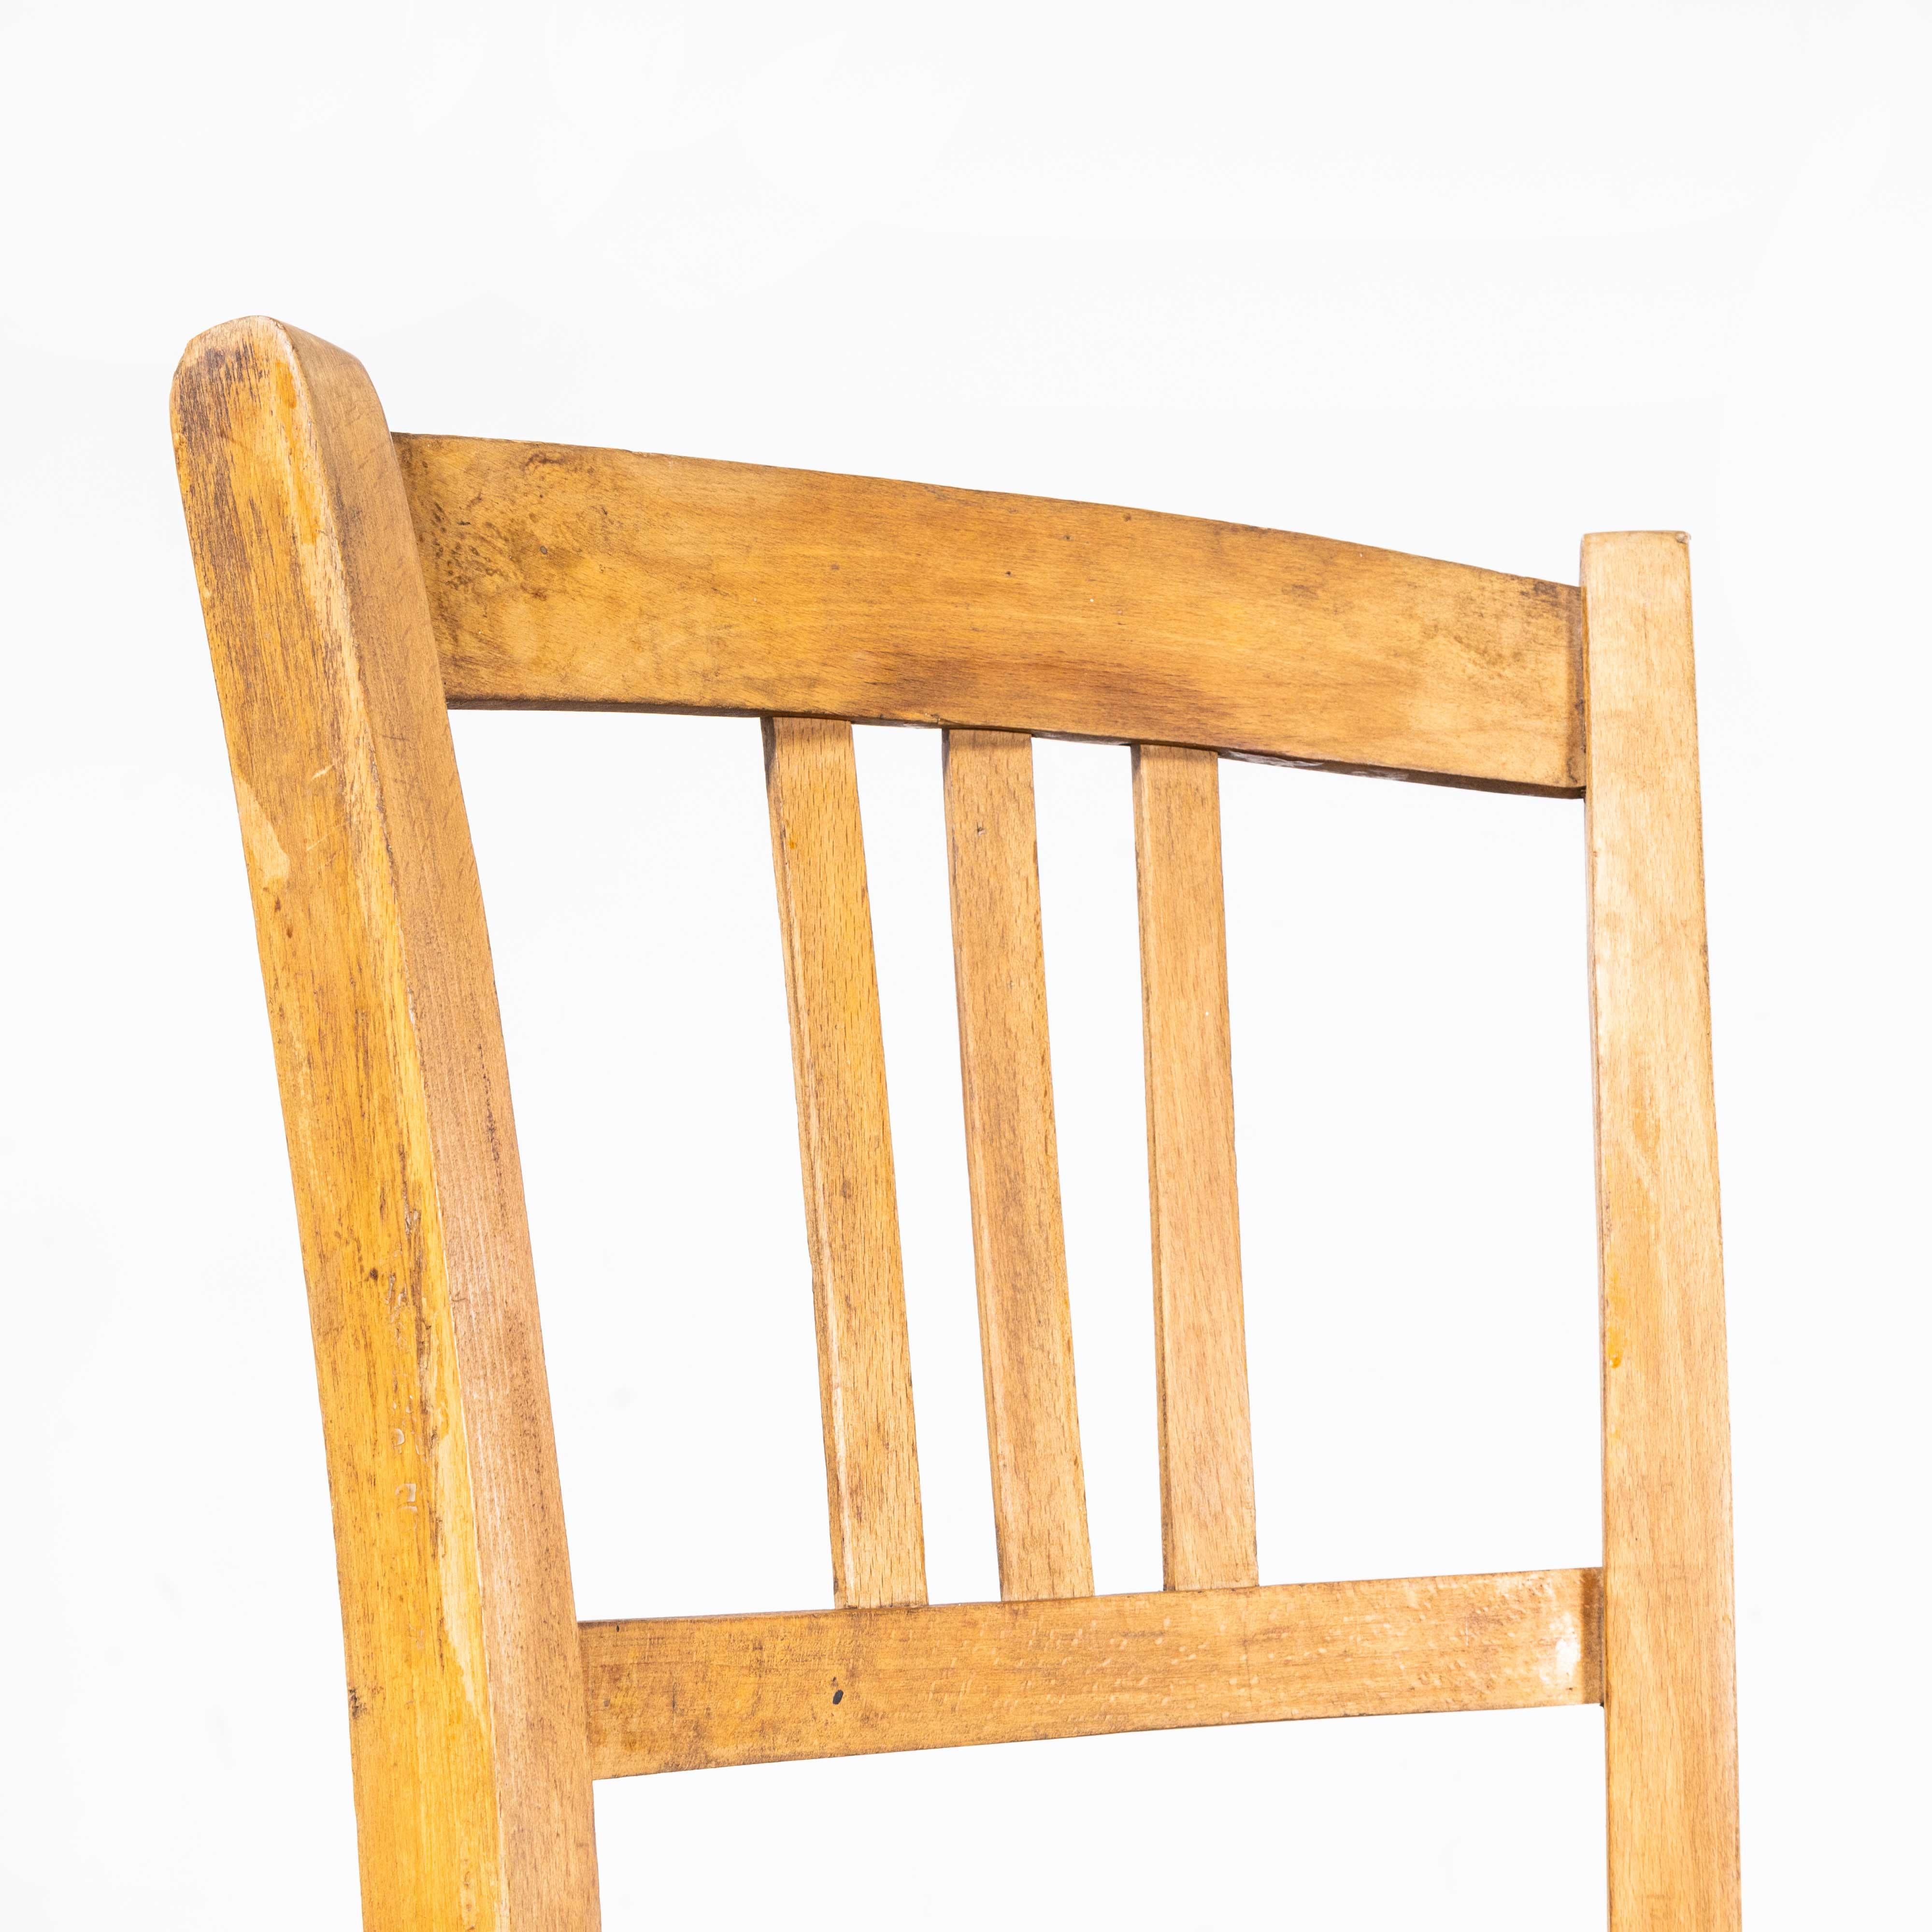 1950's Original French Slatted Farmhouse Chairs From Provence - Set Of Ten For Sale 1